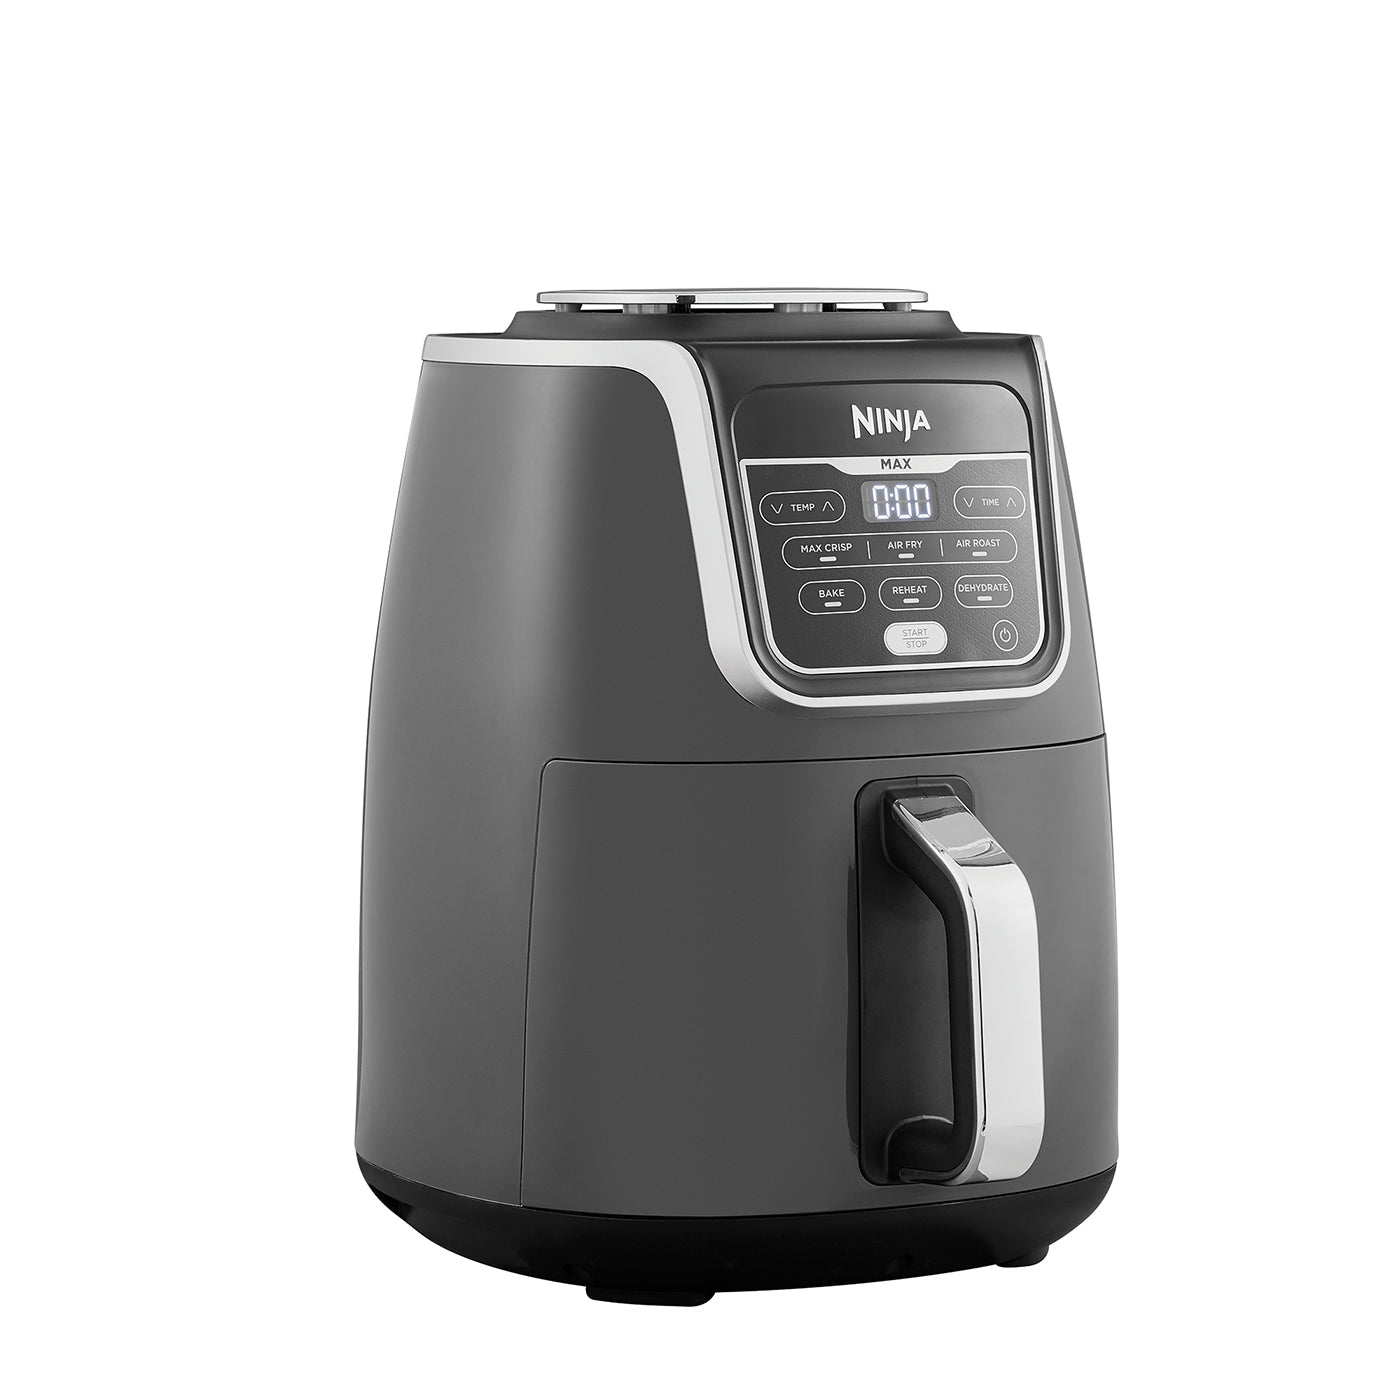 Ninja Max XL Air Fryer That Cooks, Crisps, Roasts, Broils, Bakes, Reheats and Dehydrates, with 5.5 Quart Capacity, and A High Gloss Finish, Other